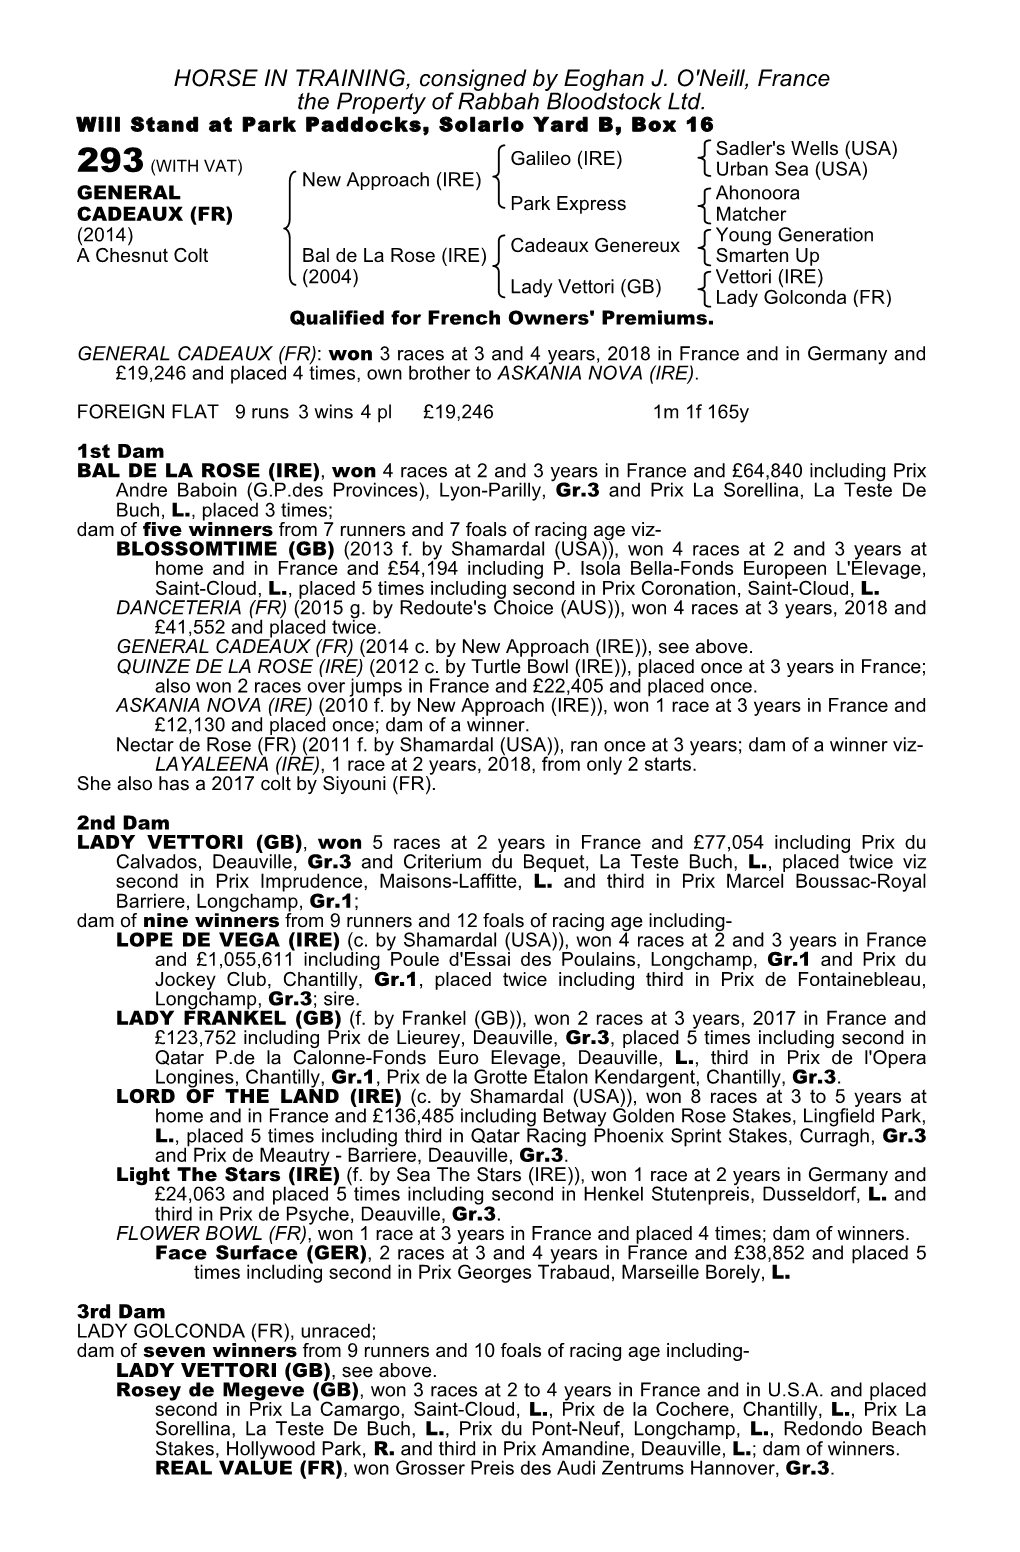 HORSE in TRAINING, Consigned by Eoghan J. O'neill, France the Property of Rabbah Bloodstock Ltd